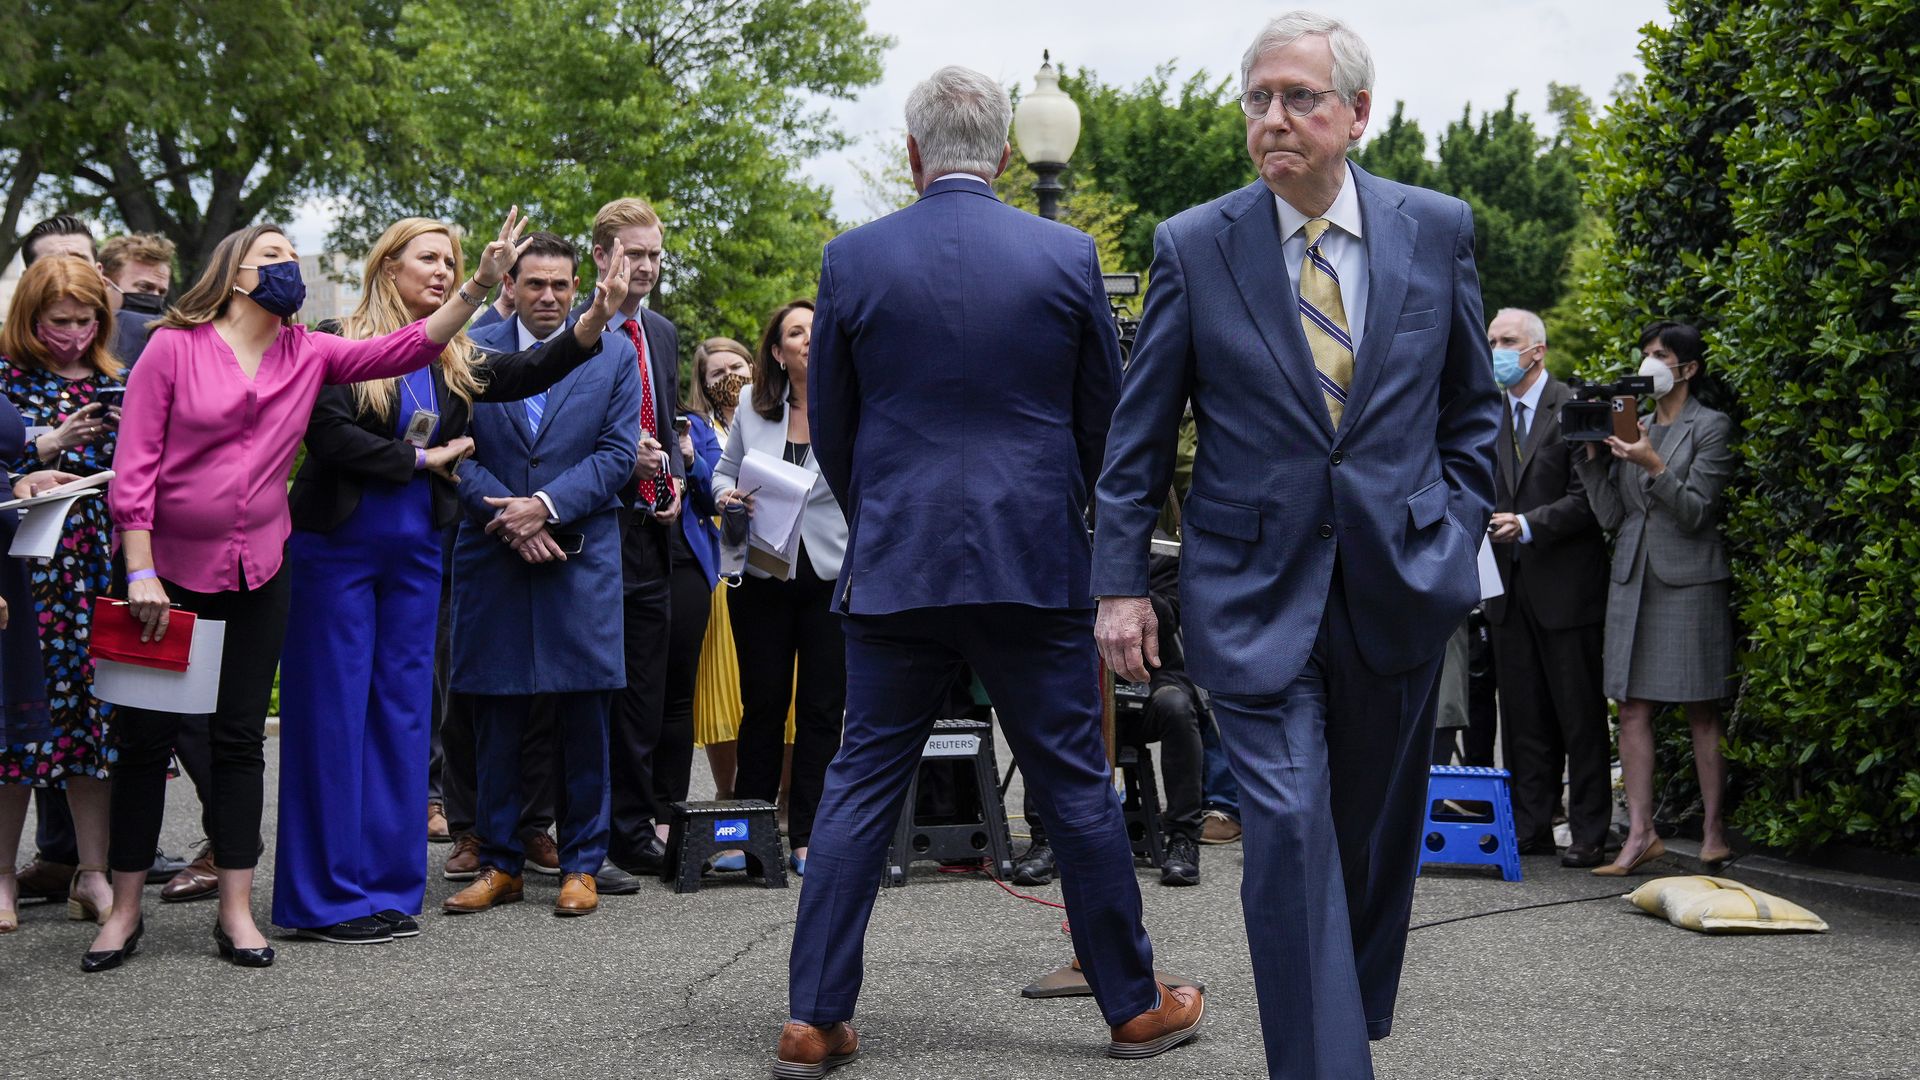 Senate Minority Leader Mitch McConnell is seen leaving House Minority Leader Kevin McCarthy after he made remarks at the White House.